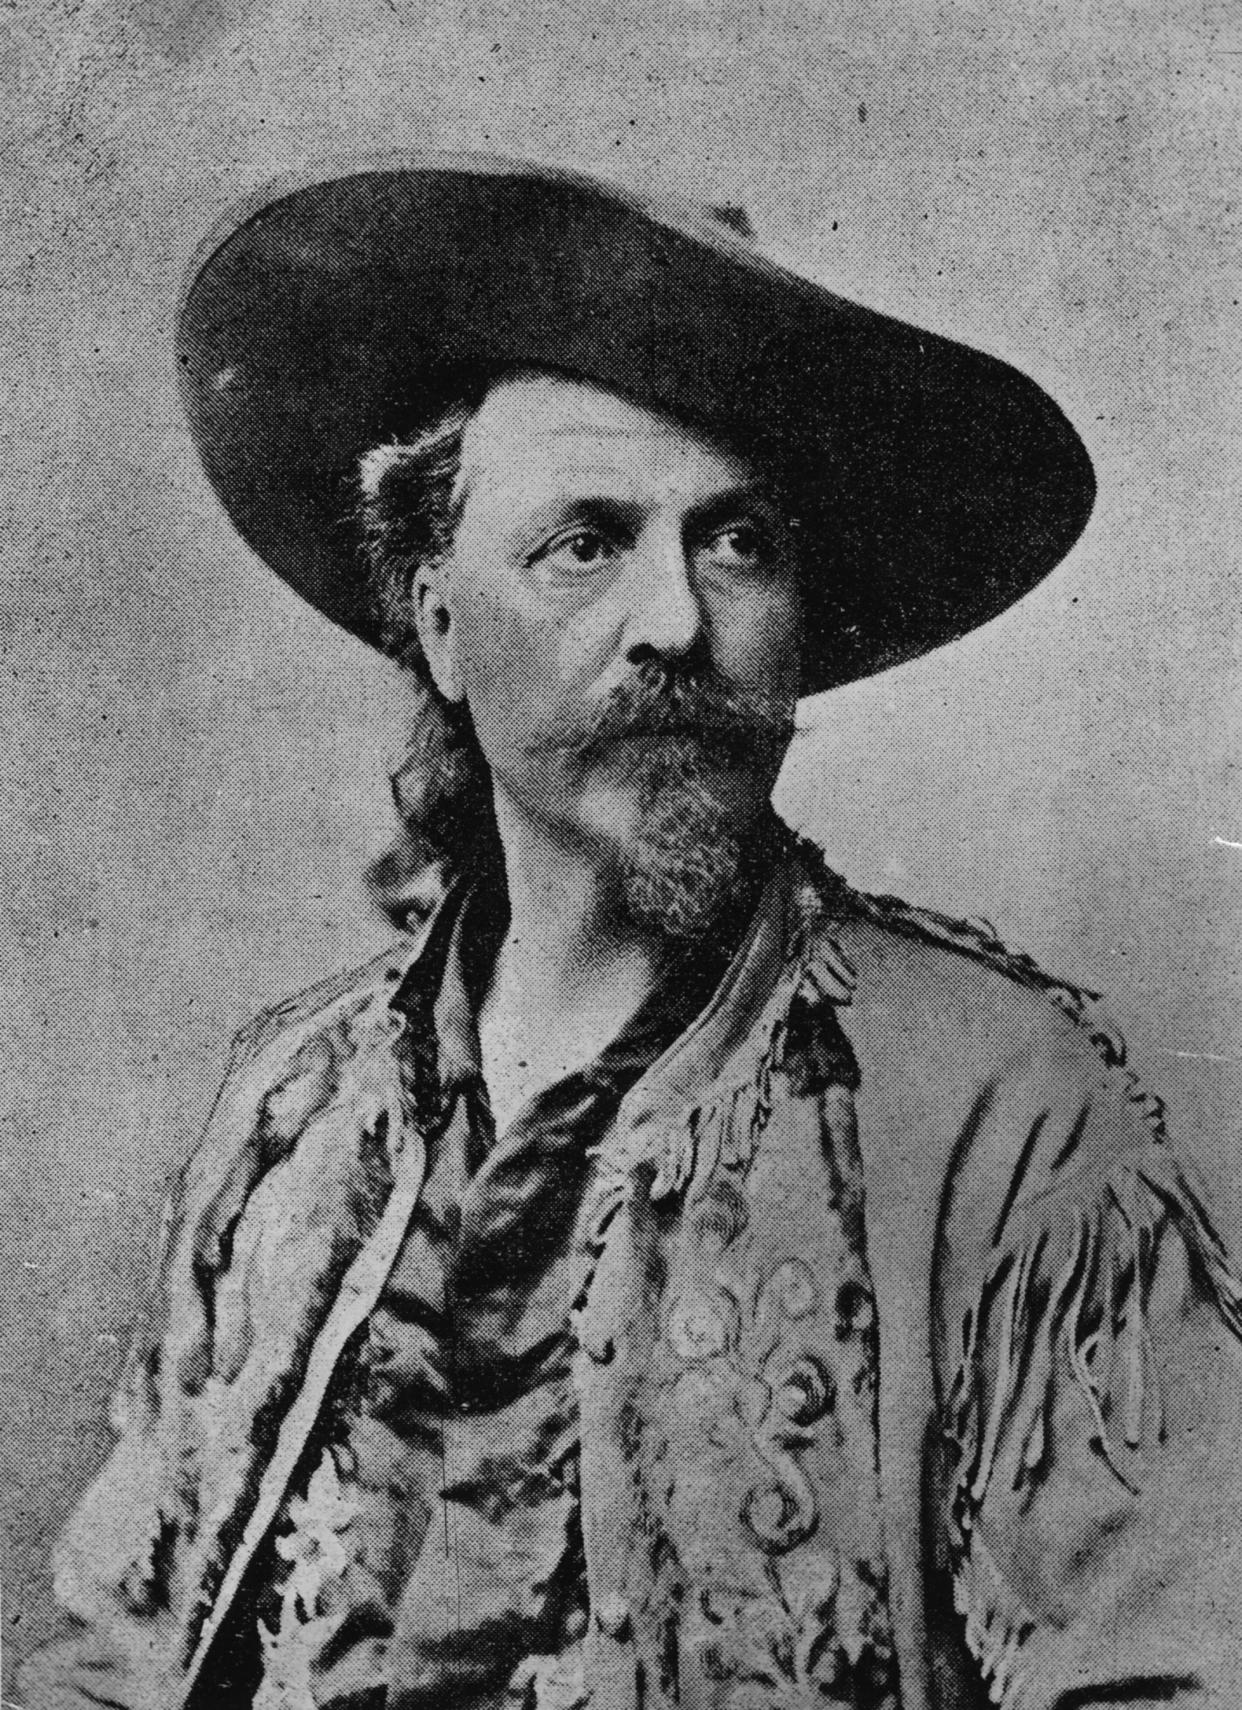 circa 1886: William Frederick Cody (1846 - 1917), American guide, Indian scout and buffalo hunter who toured America in a wild west show as 'Buffalo Bill'.